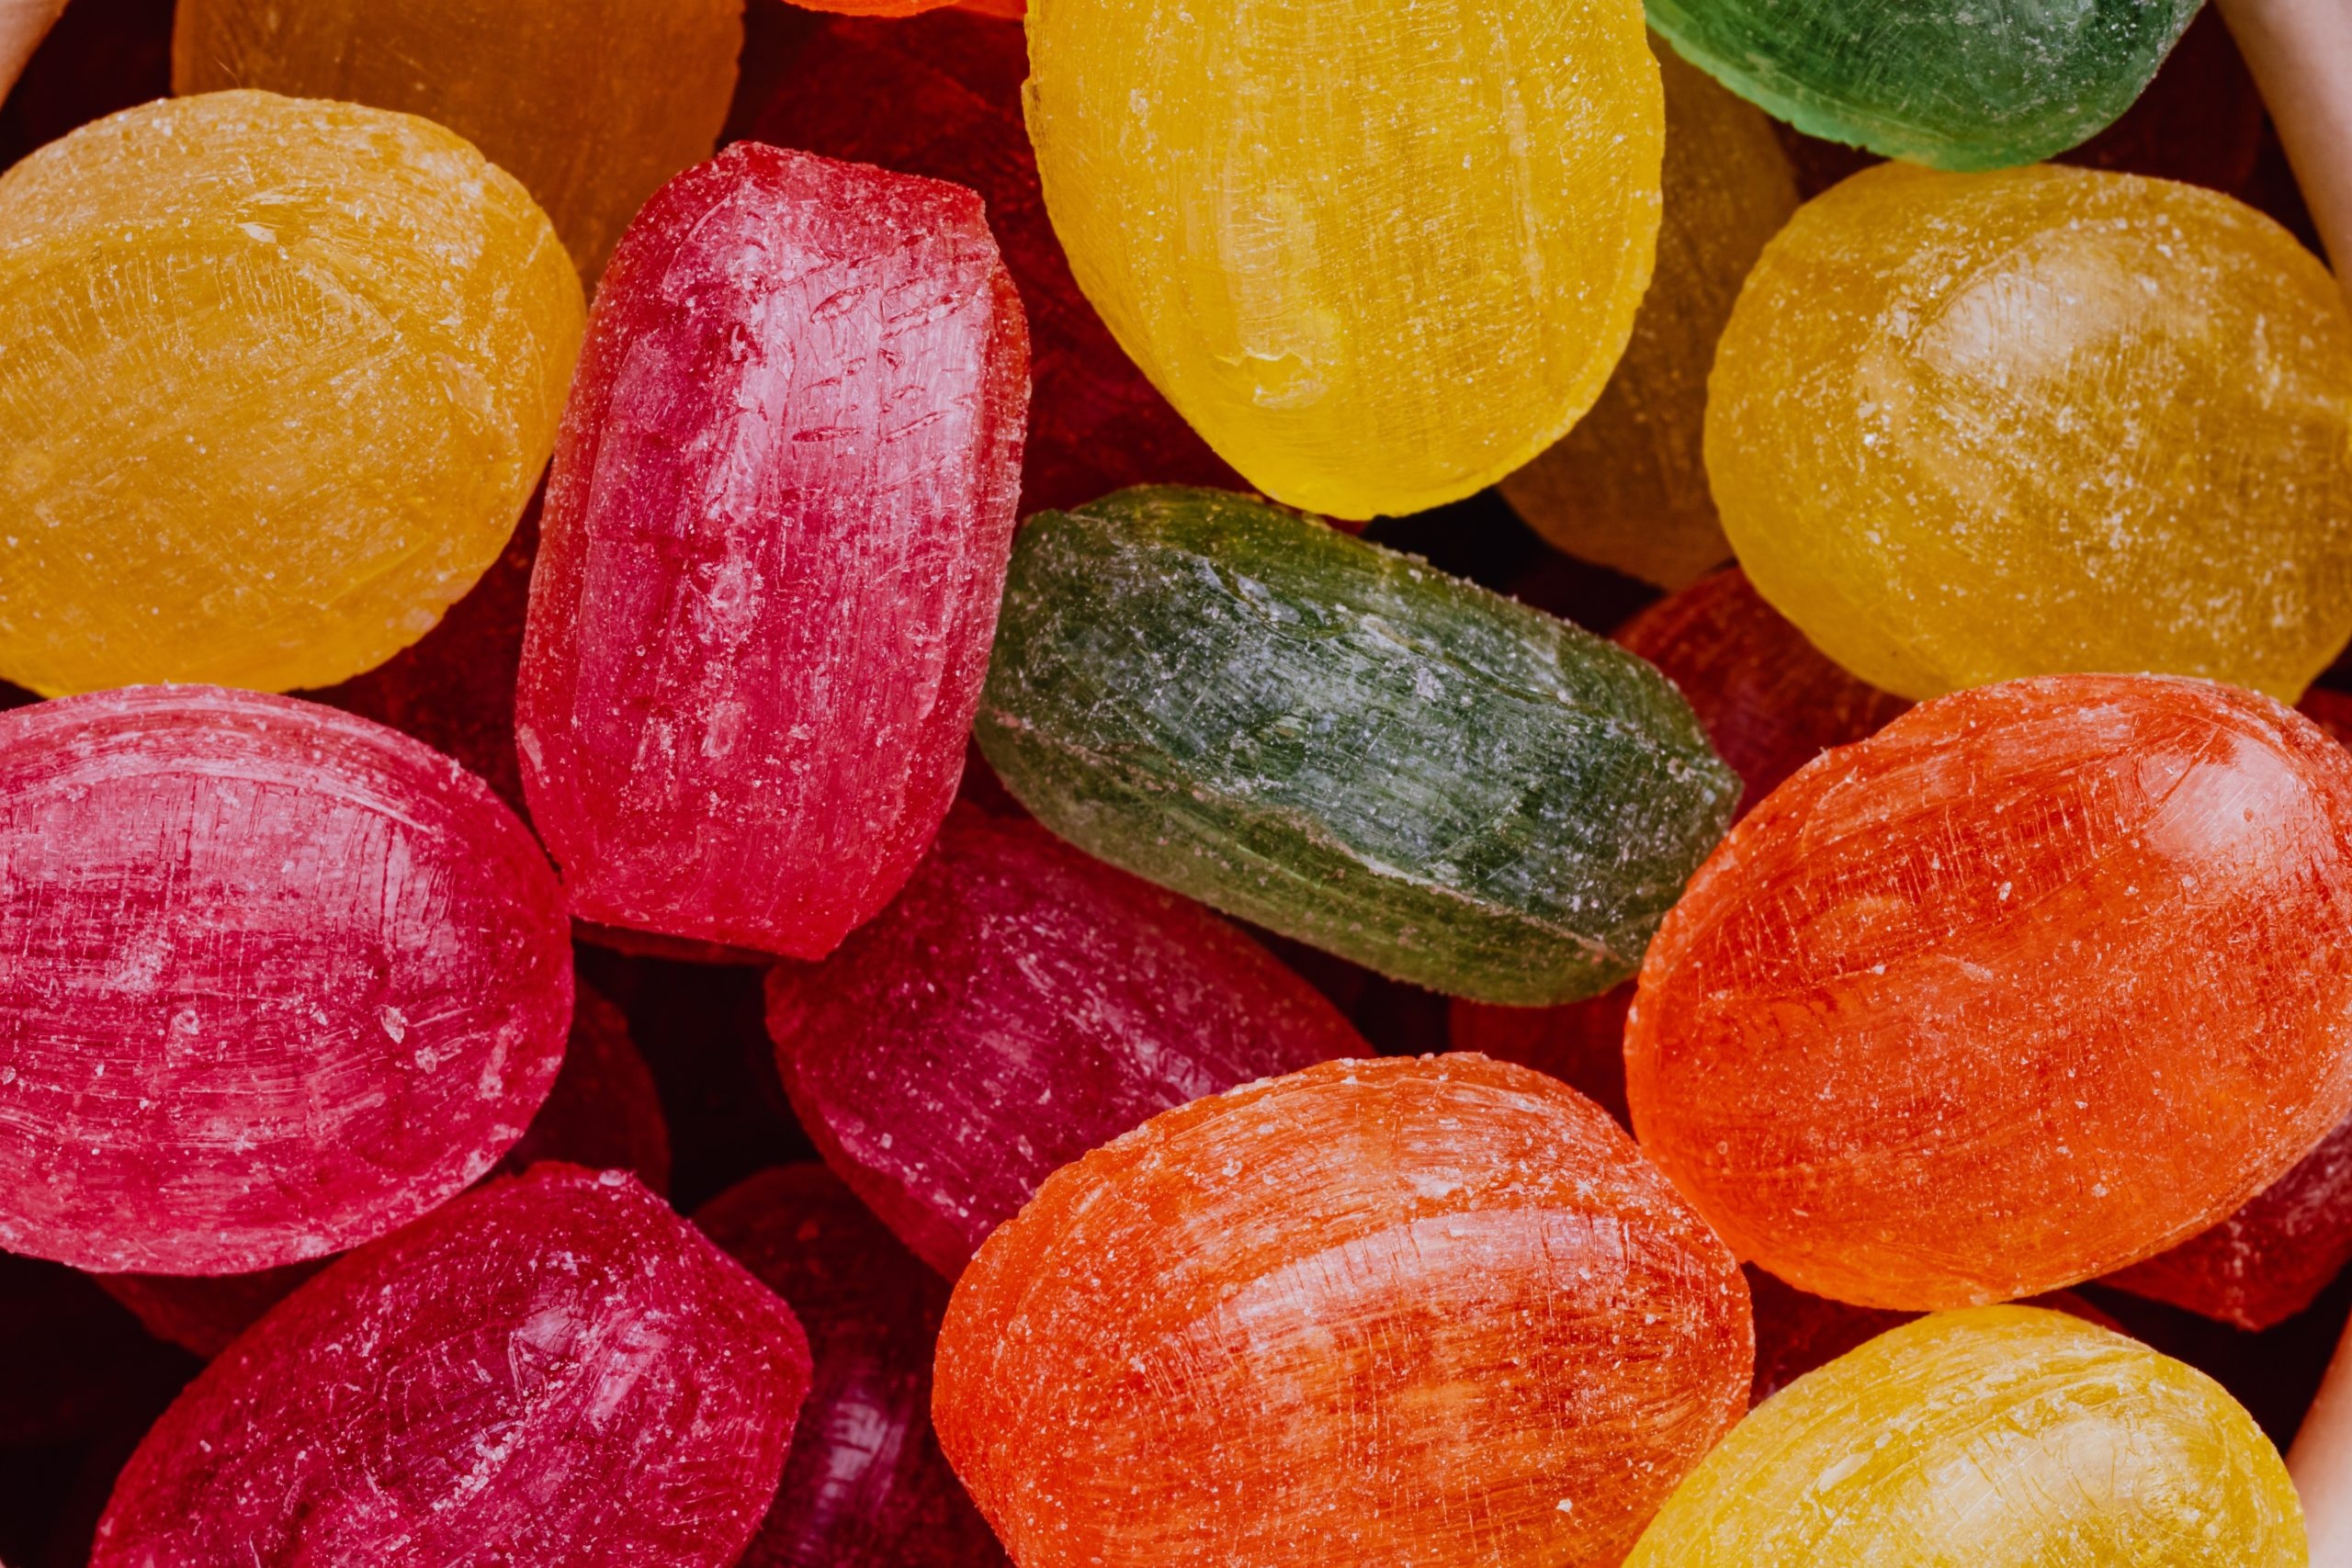 Candy store excitement, Sweet cravings, Pascack Valley's new addition, Sugary delights, 2560x1710 HD Desktop